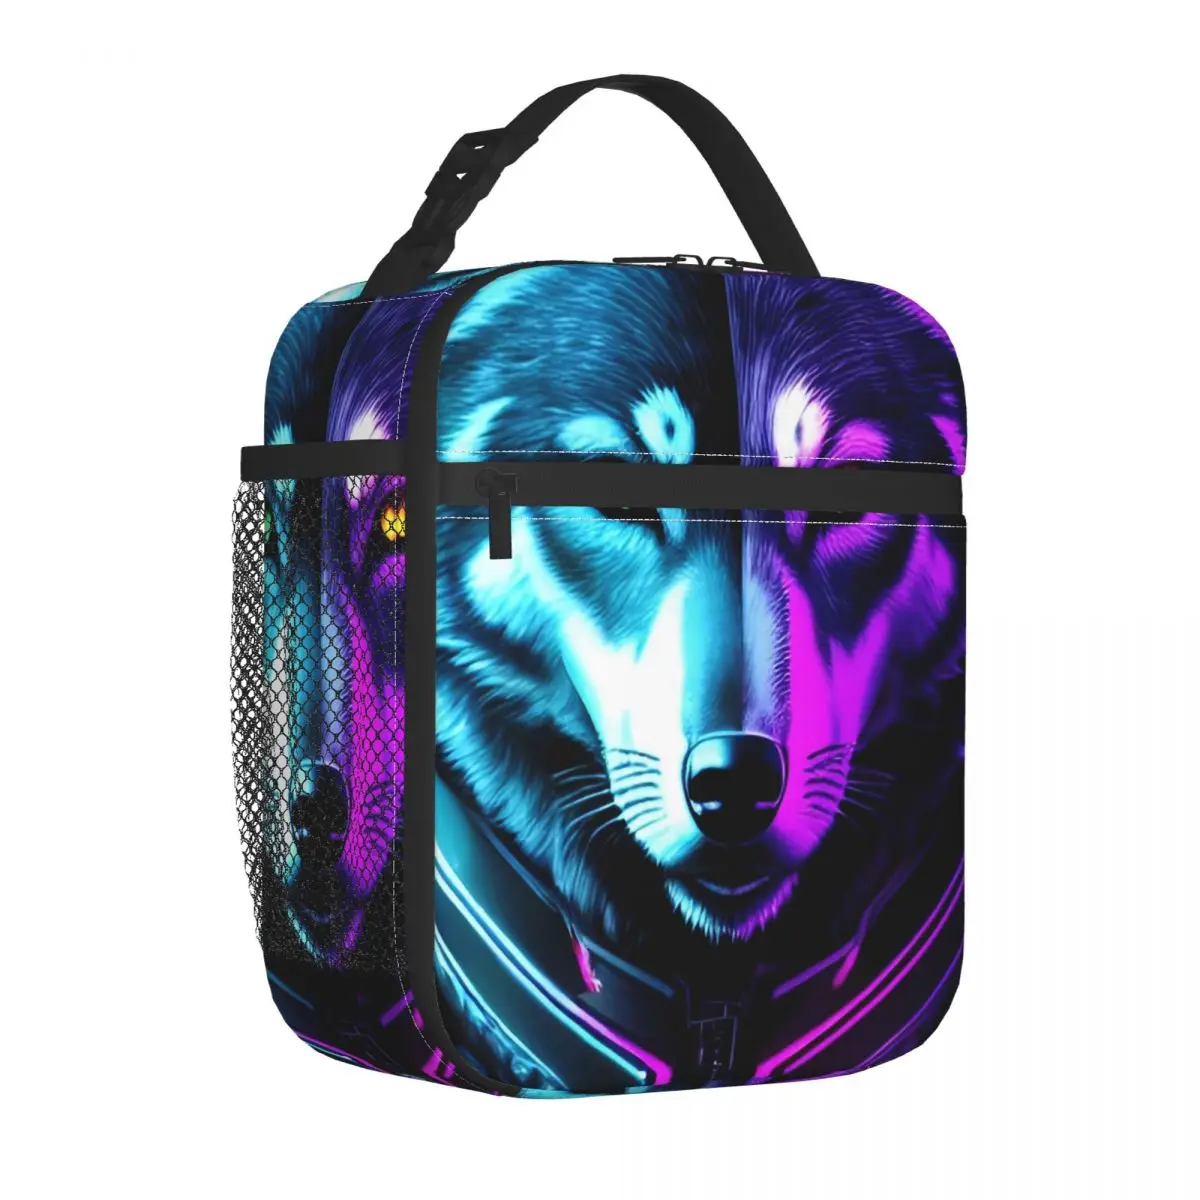 

Cyber Wolf Neon Lunch Bag Funny Animal Fashion Lunch Box For Child Picnic Portable Cooler Bag Designer Tote Food Bags